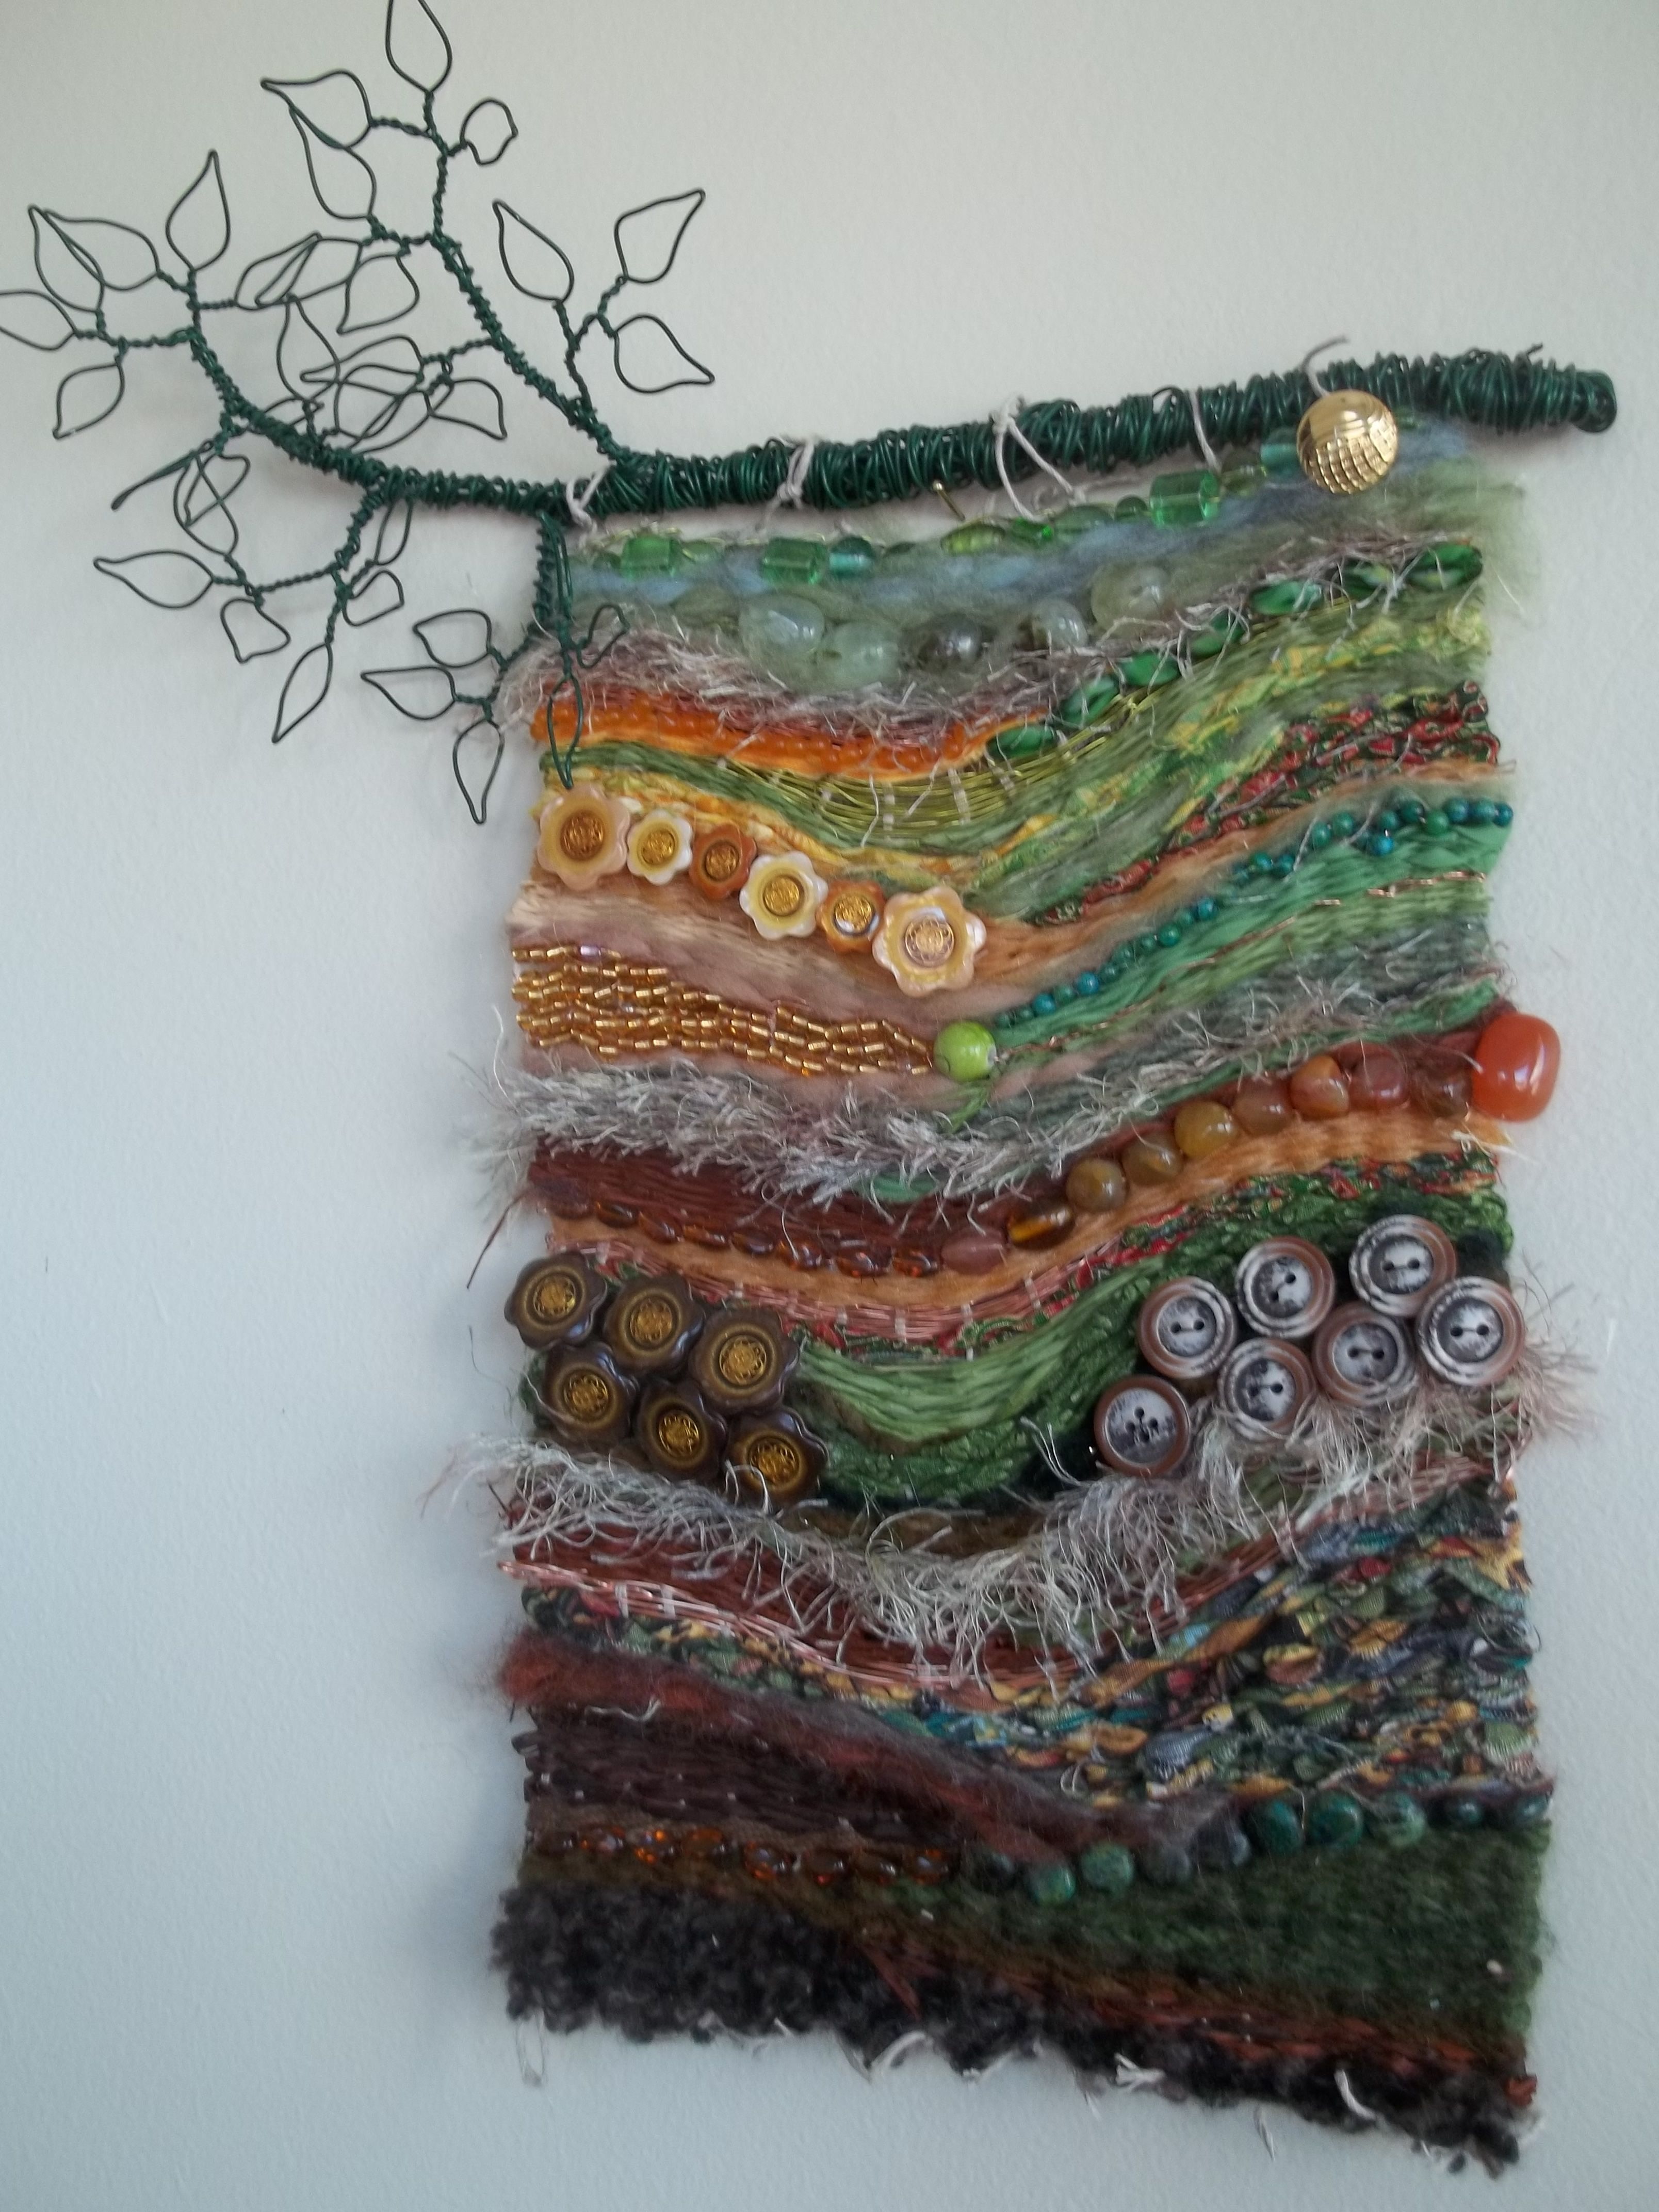 Fiber Art, Wire Wrapping And Wraps With Regard To Recent Fabric Art Wall Hangings (View 15 of 15)